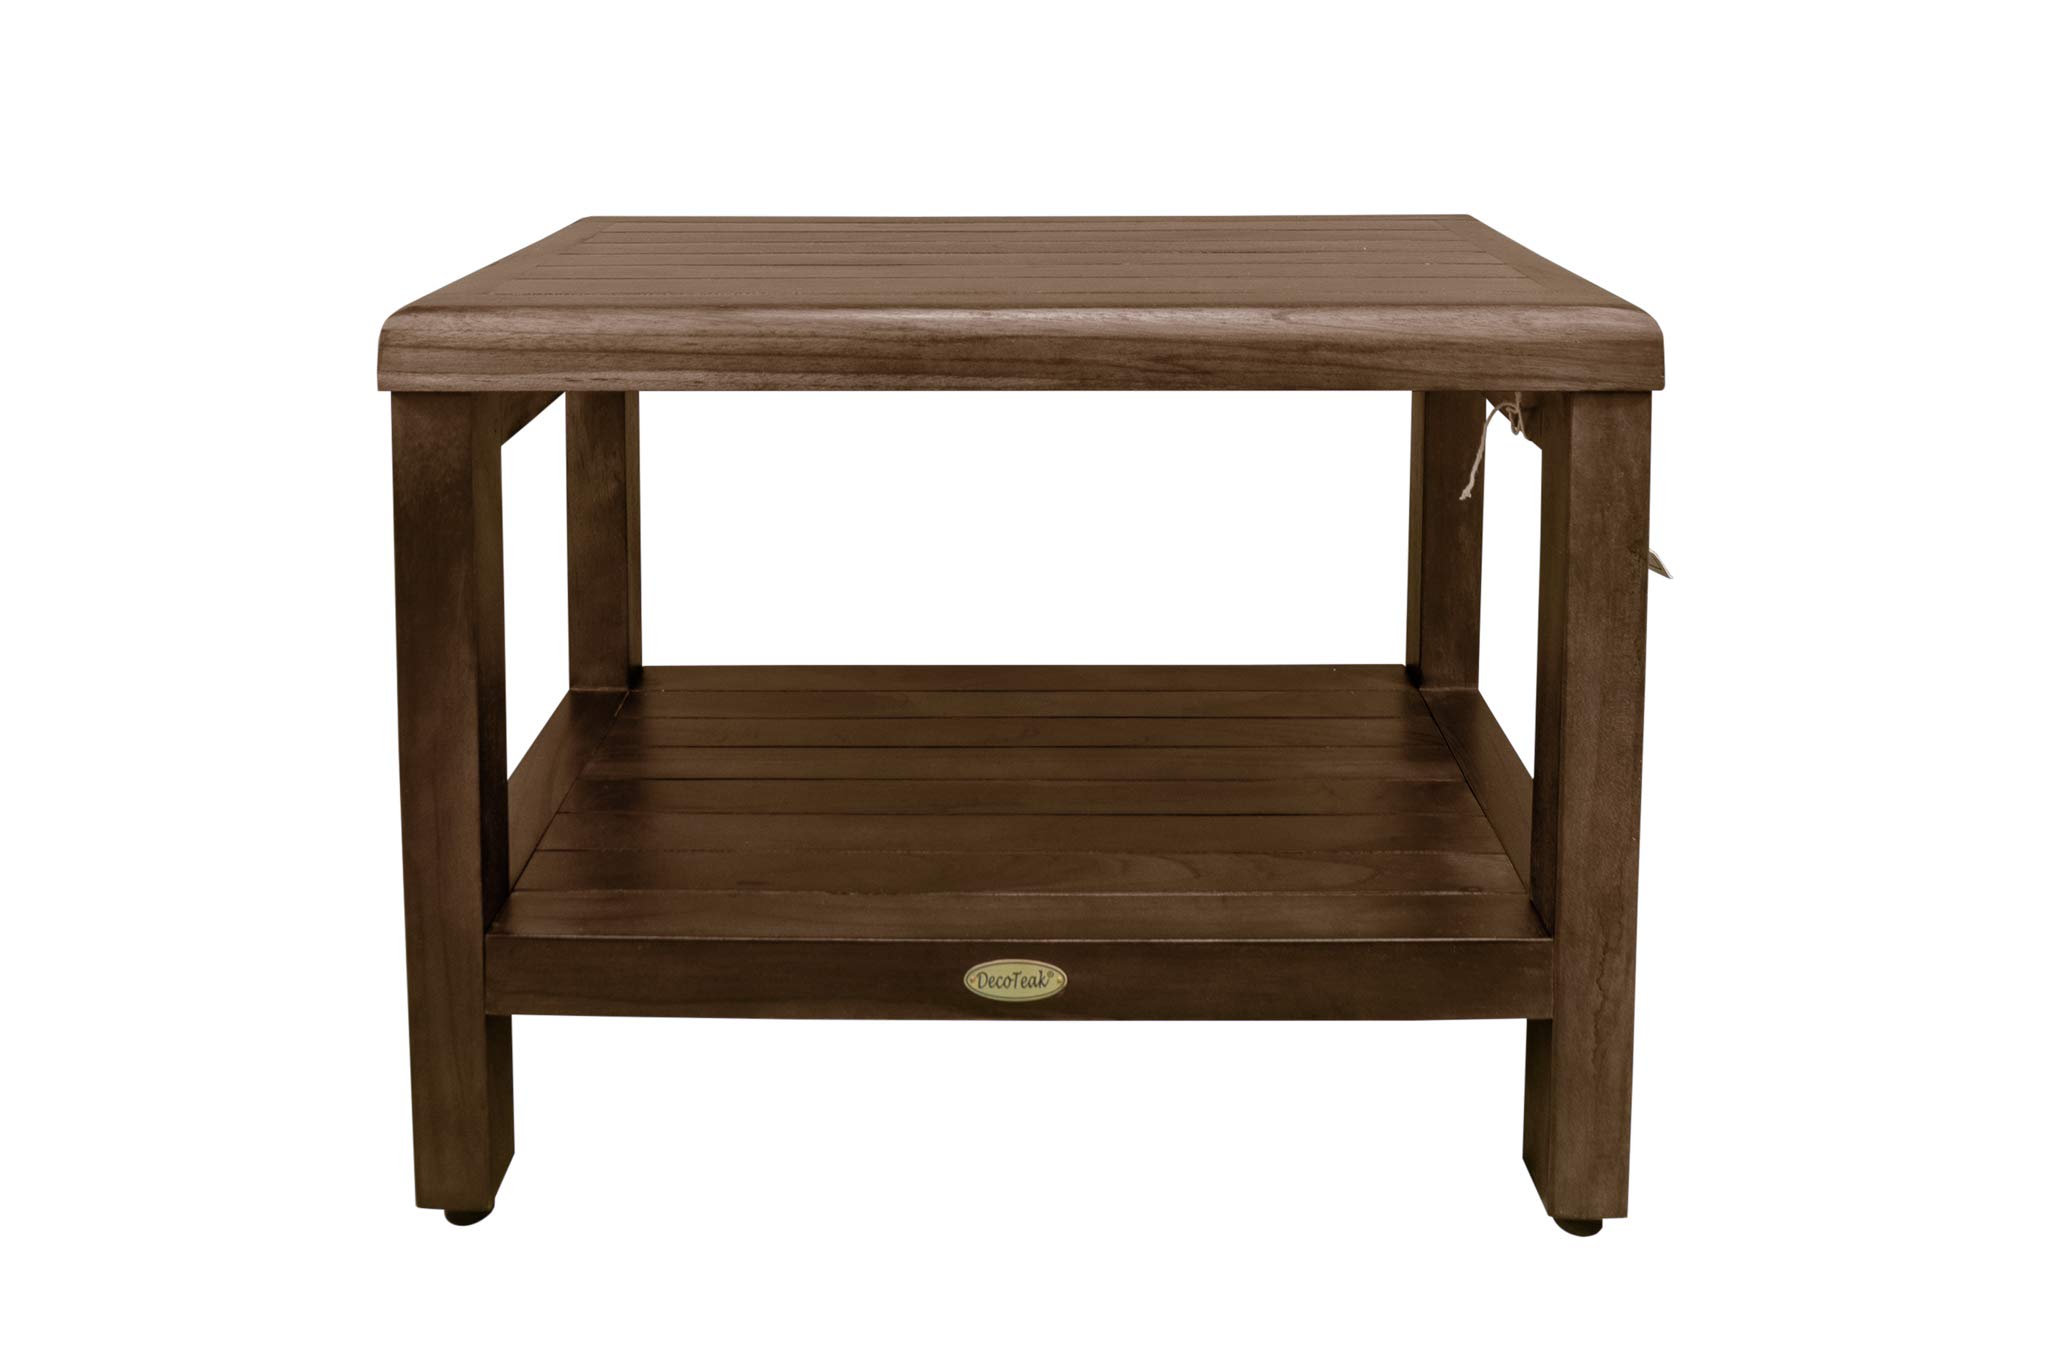 DecoTeak Teak Wood Shower Bench Natural Wood Seat Shower stool with Shelf Eleganto Armless Shower Bench for Indoors and Outdoors - 24 inches Length